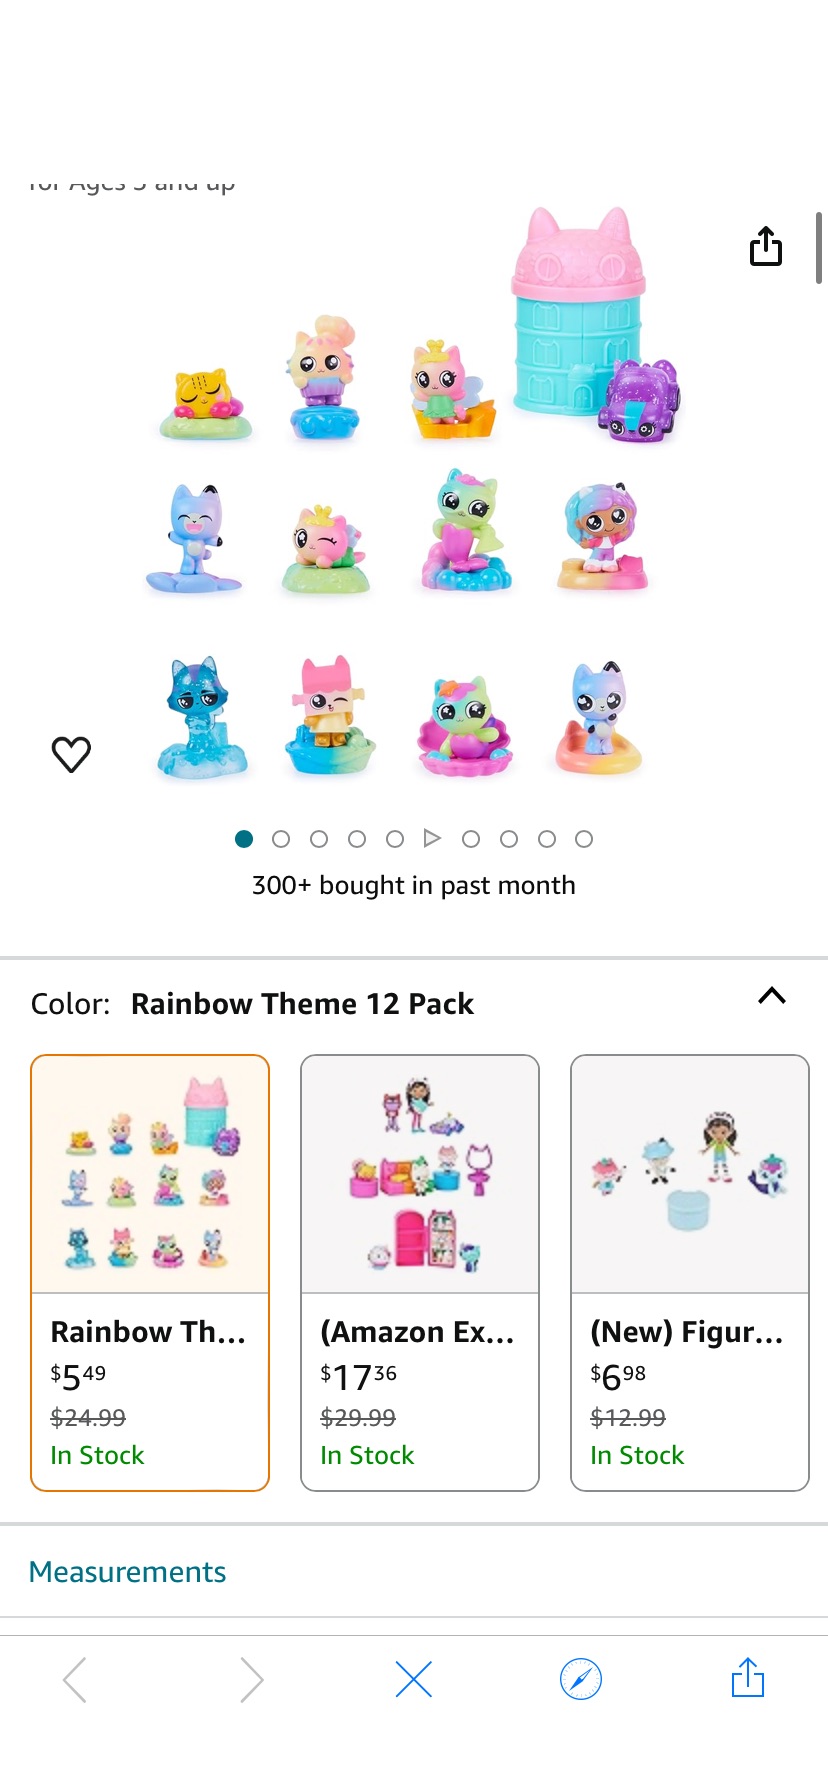 Amazon.com: Gabby’s Dollhouse, Meow-mazing Mini Figures 12-Pack (Amazon Exclusive) Rainbow -Themed Toy Figures and Playsets Kids Toys for Ages 3 and up : Toys & Games